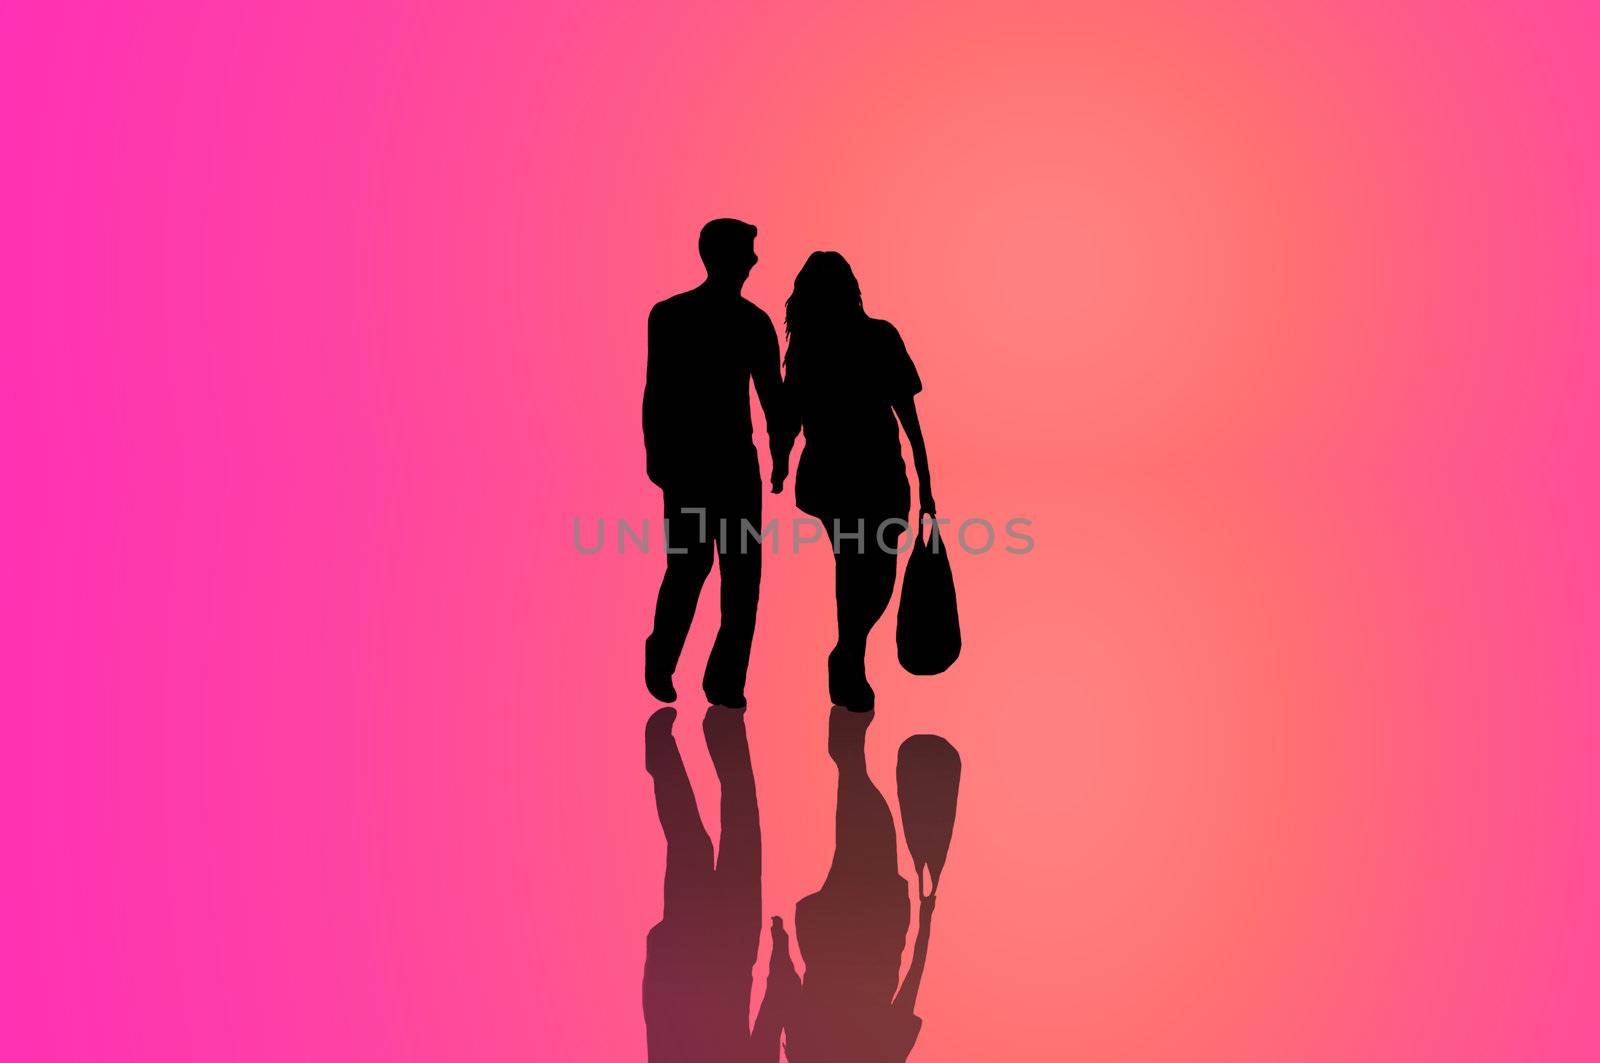 A silhouetted young couple walking on reflective surface towards a warm light with pink background.